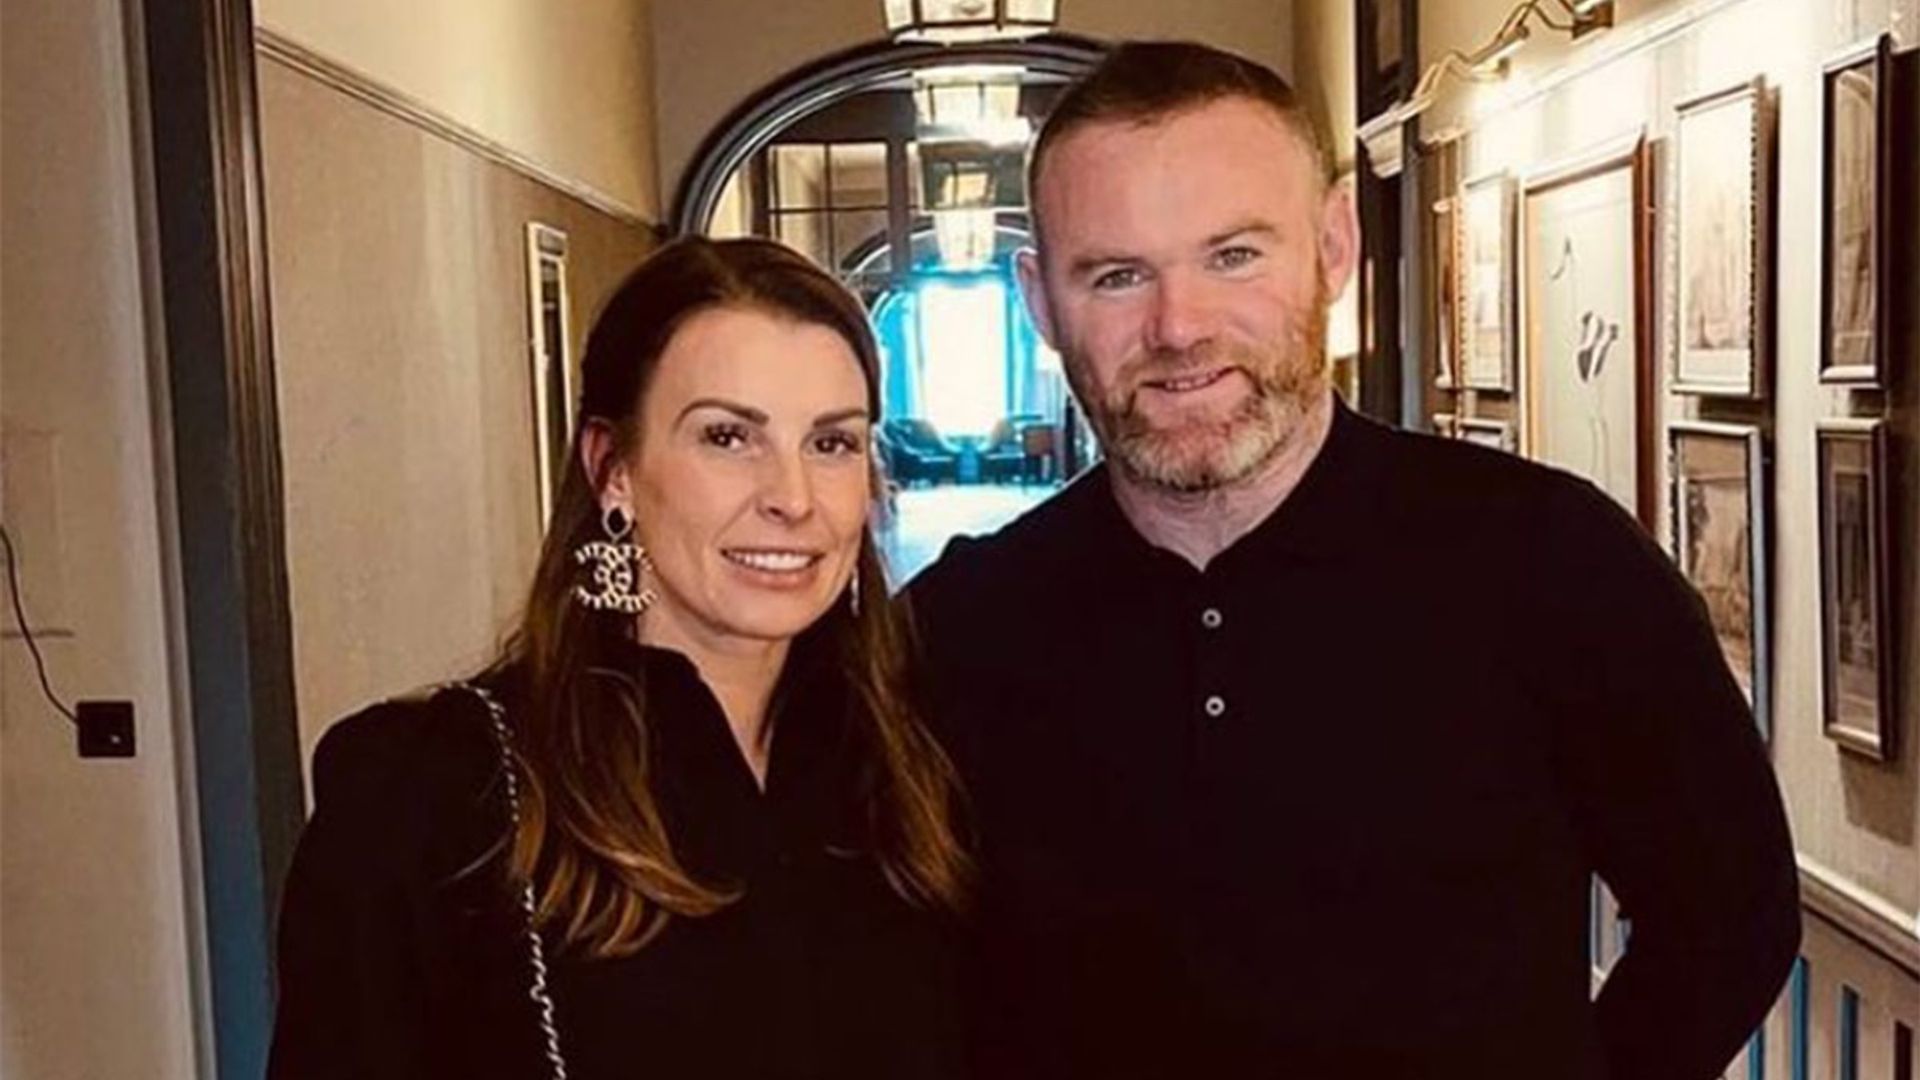 Wayne-Coleen-Rooney-out